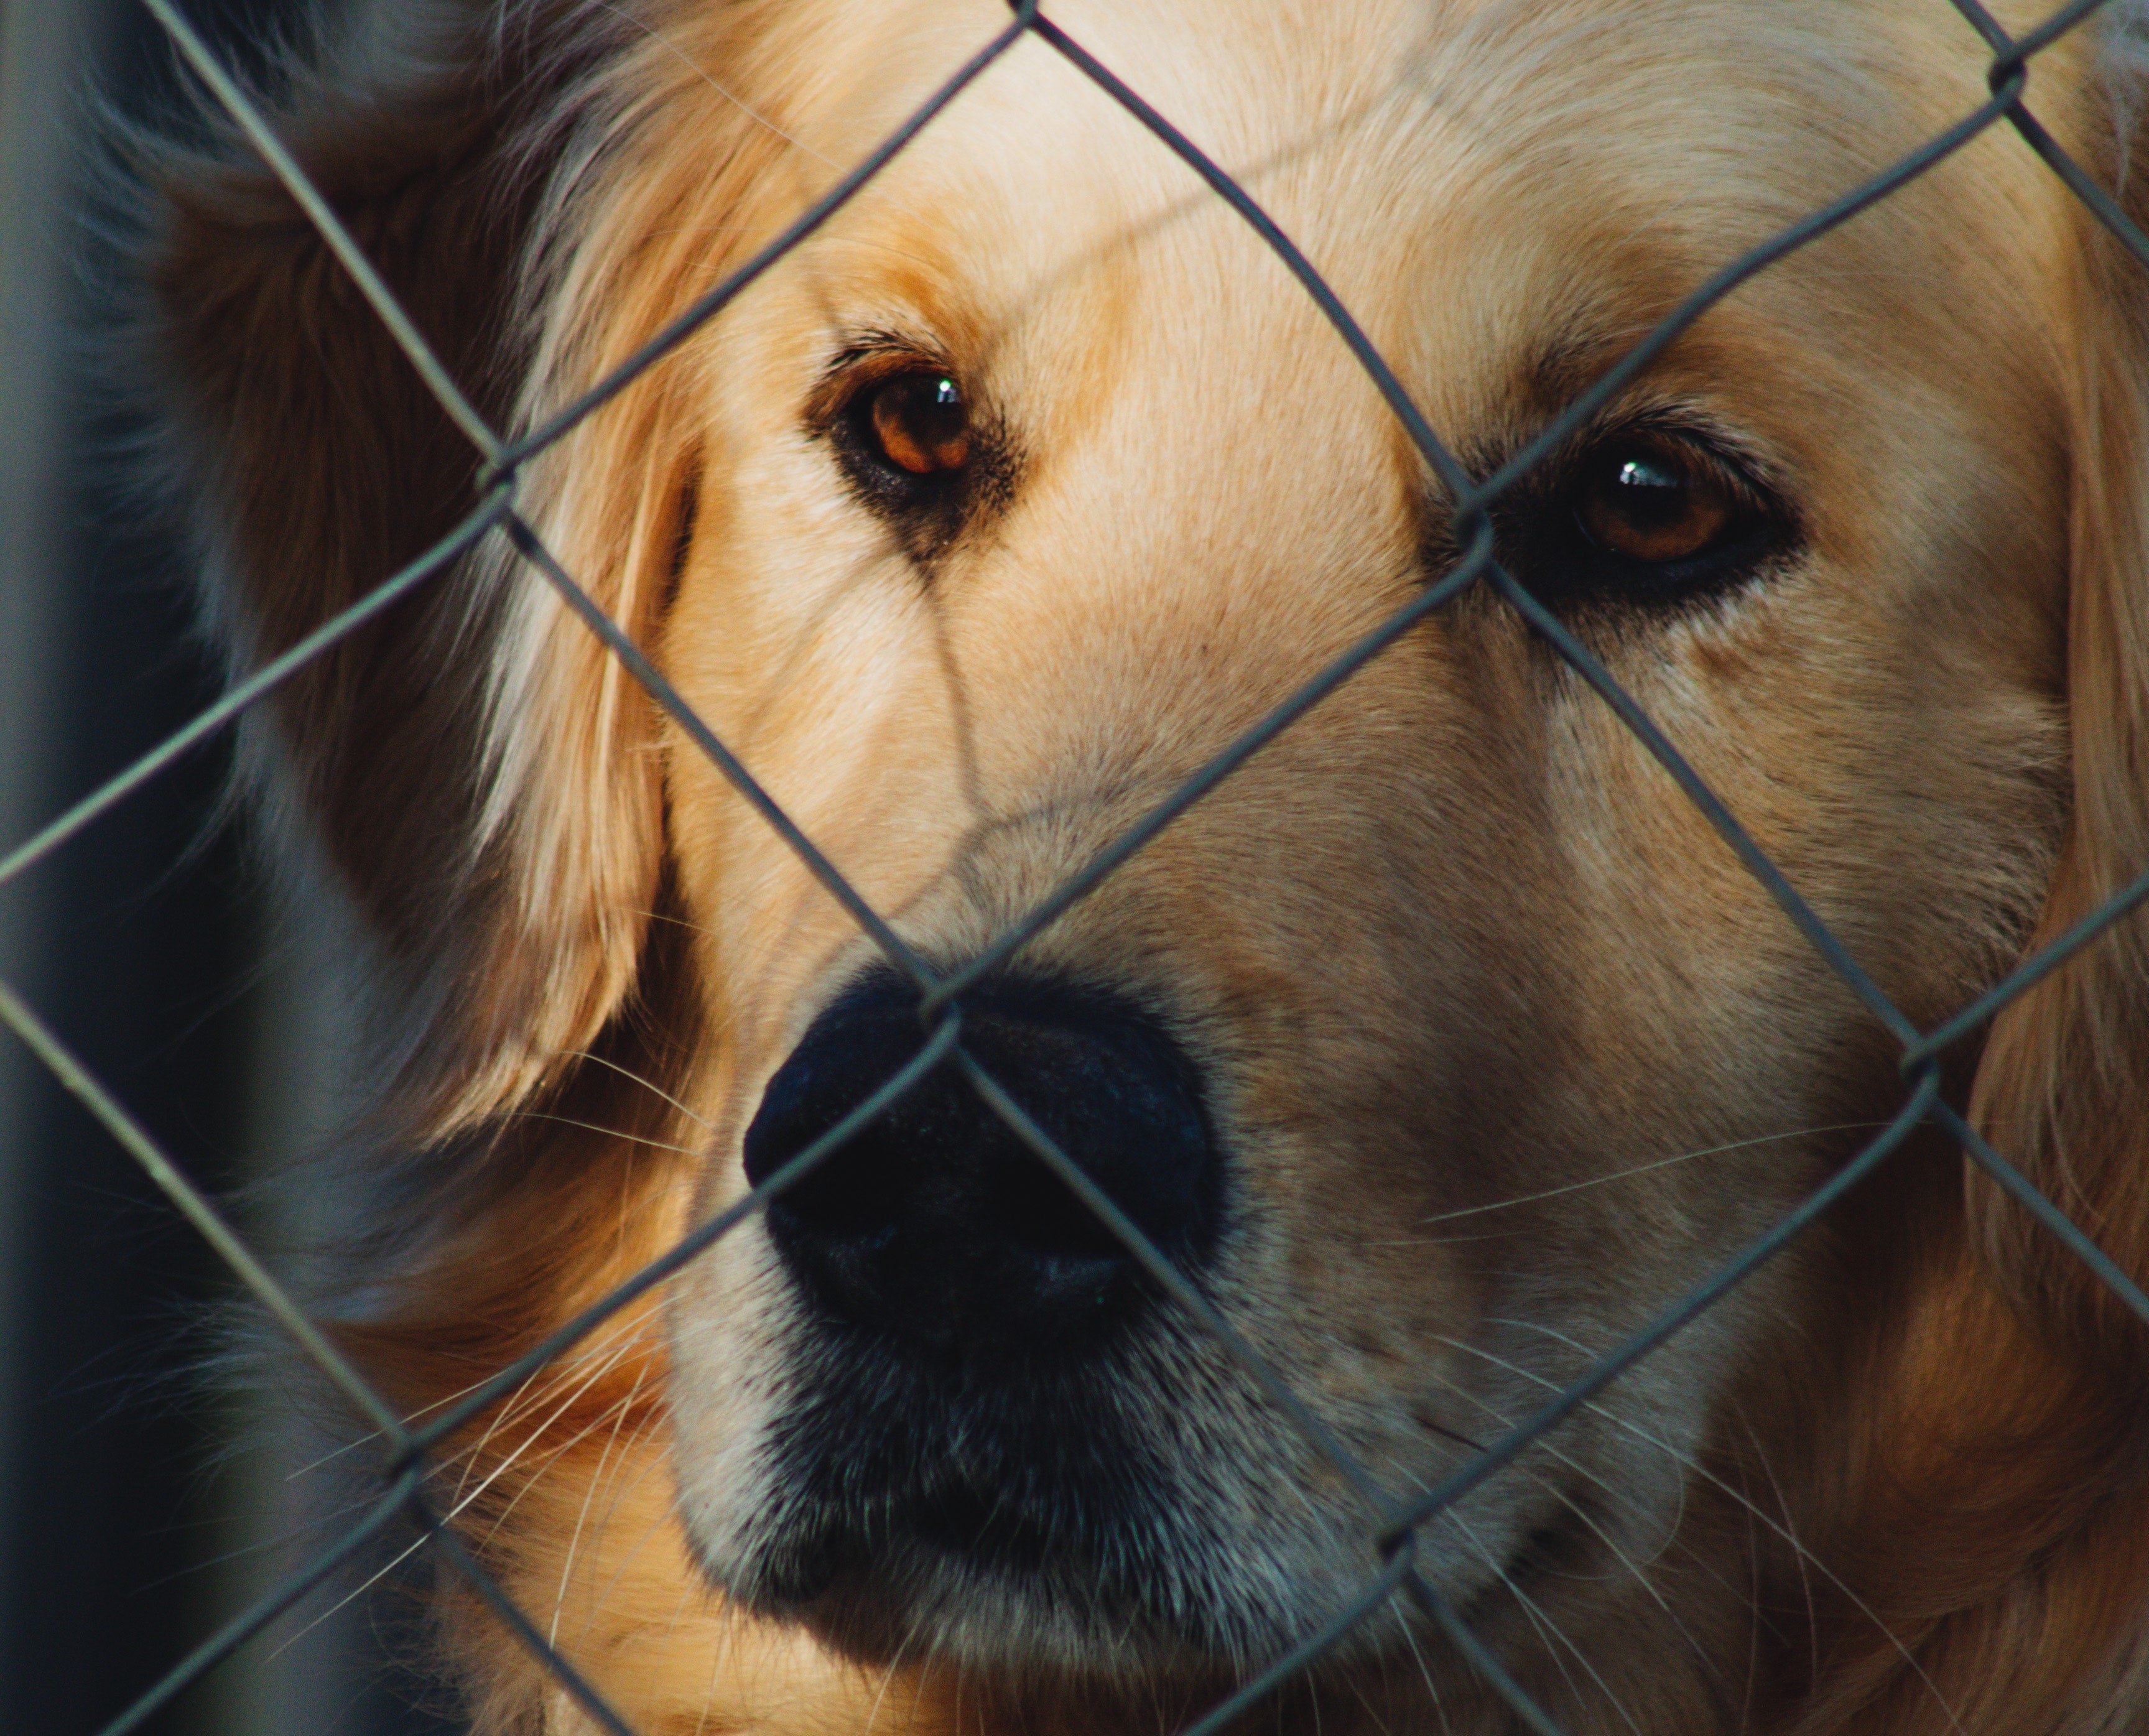 Lucy was taken to an animal shelter after she lost her owners. | Source: Pexels